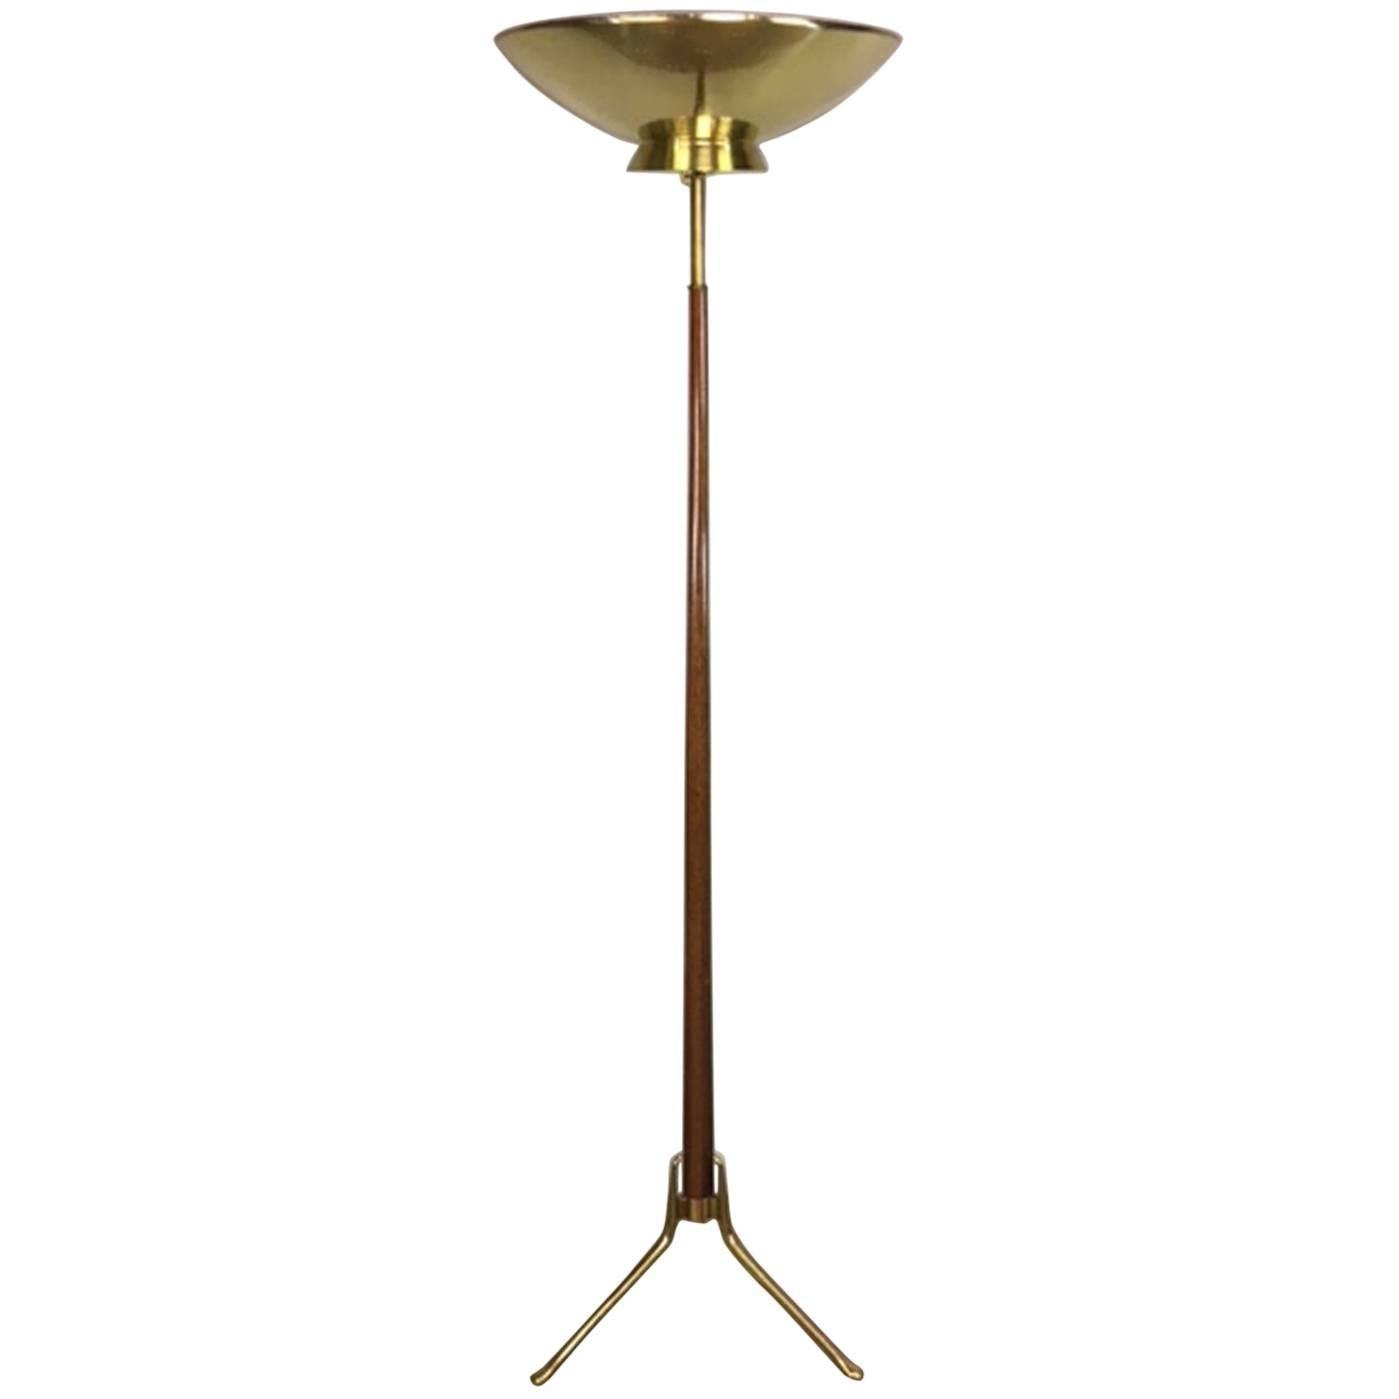 Gerald Thurston Dome Floor Lamp For Sale